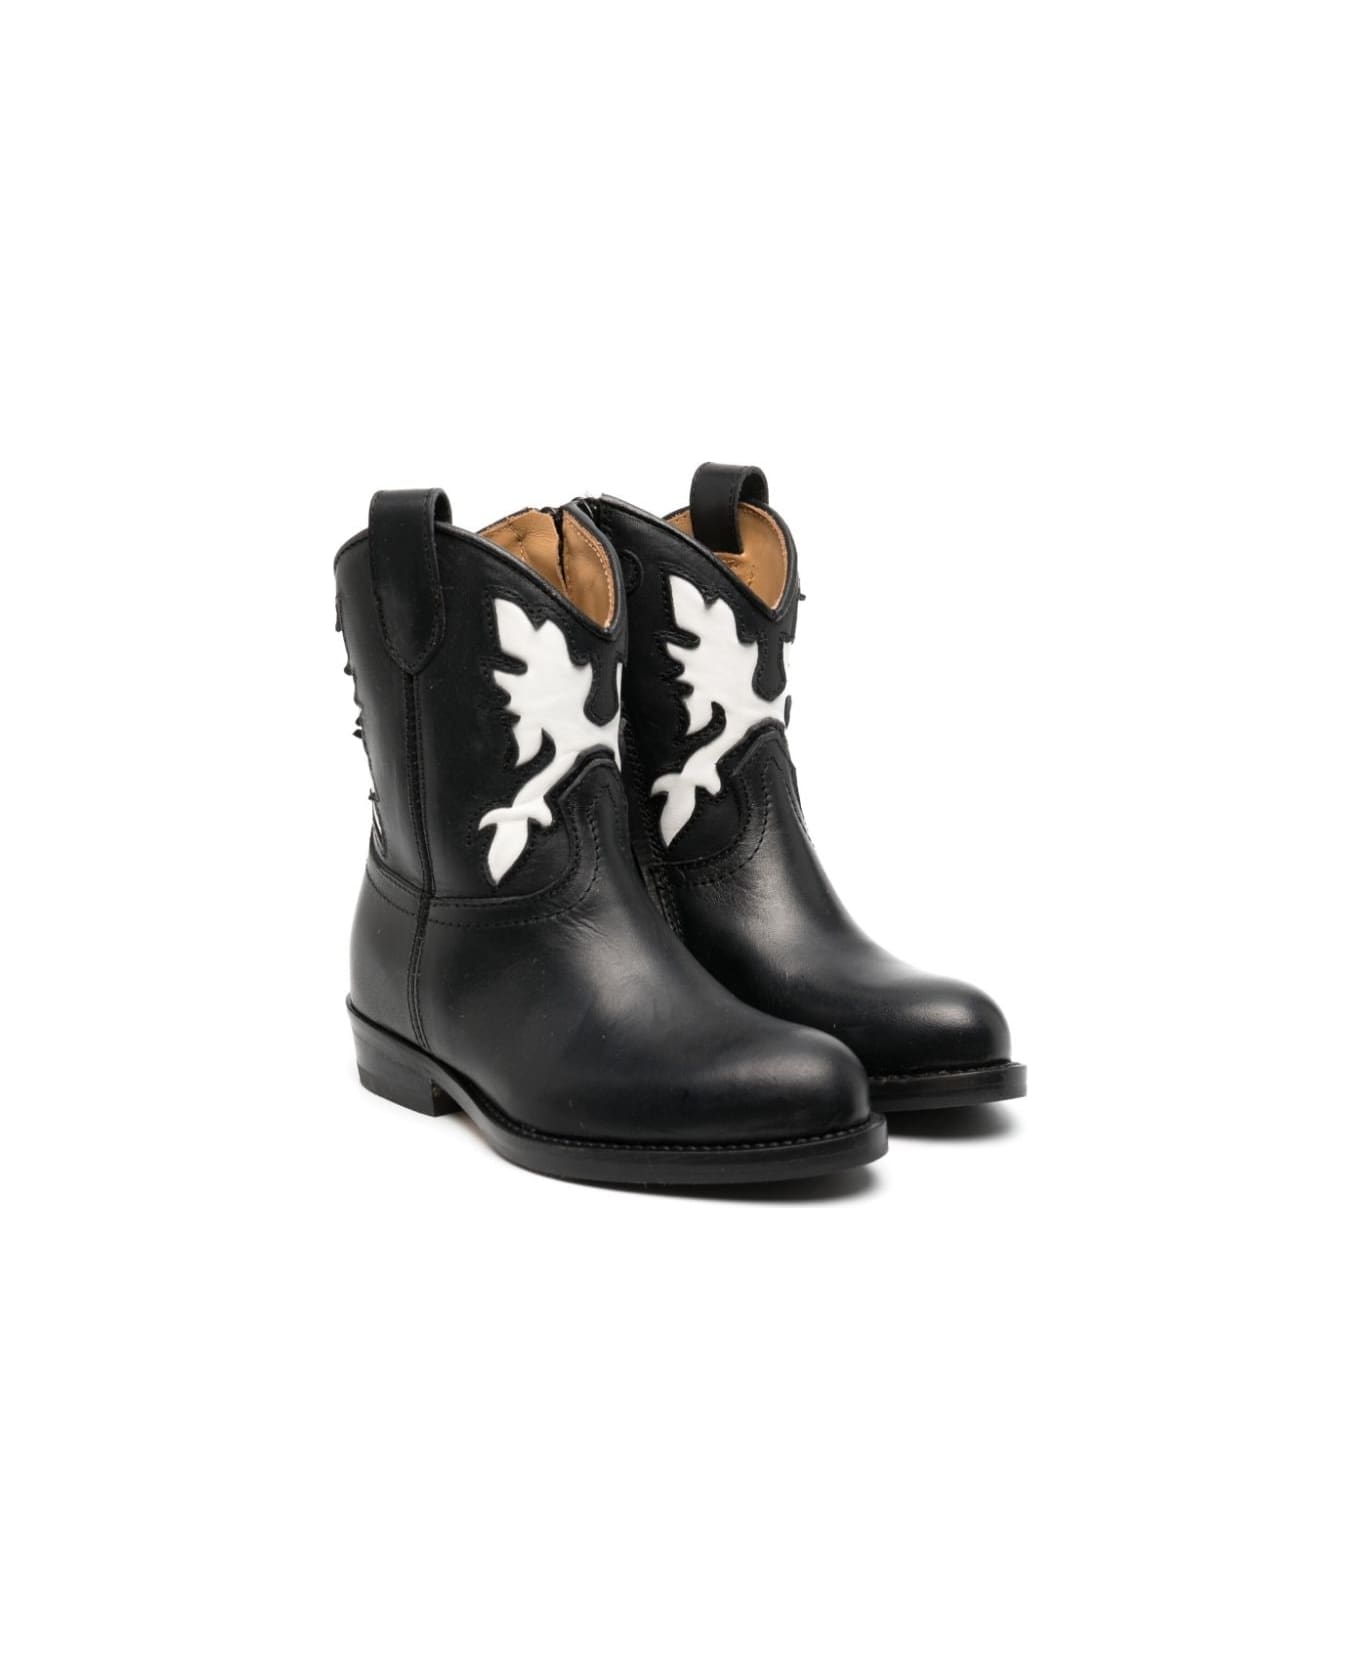 Gallucci Western Boots With Embroidery - Black